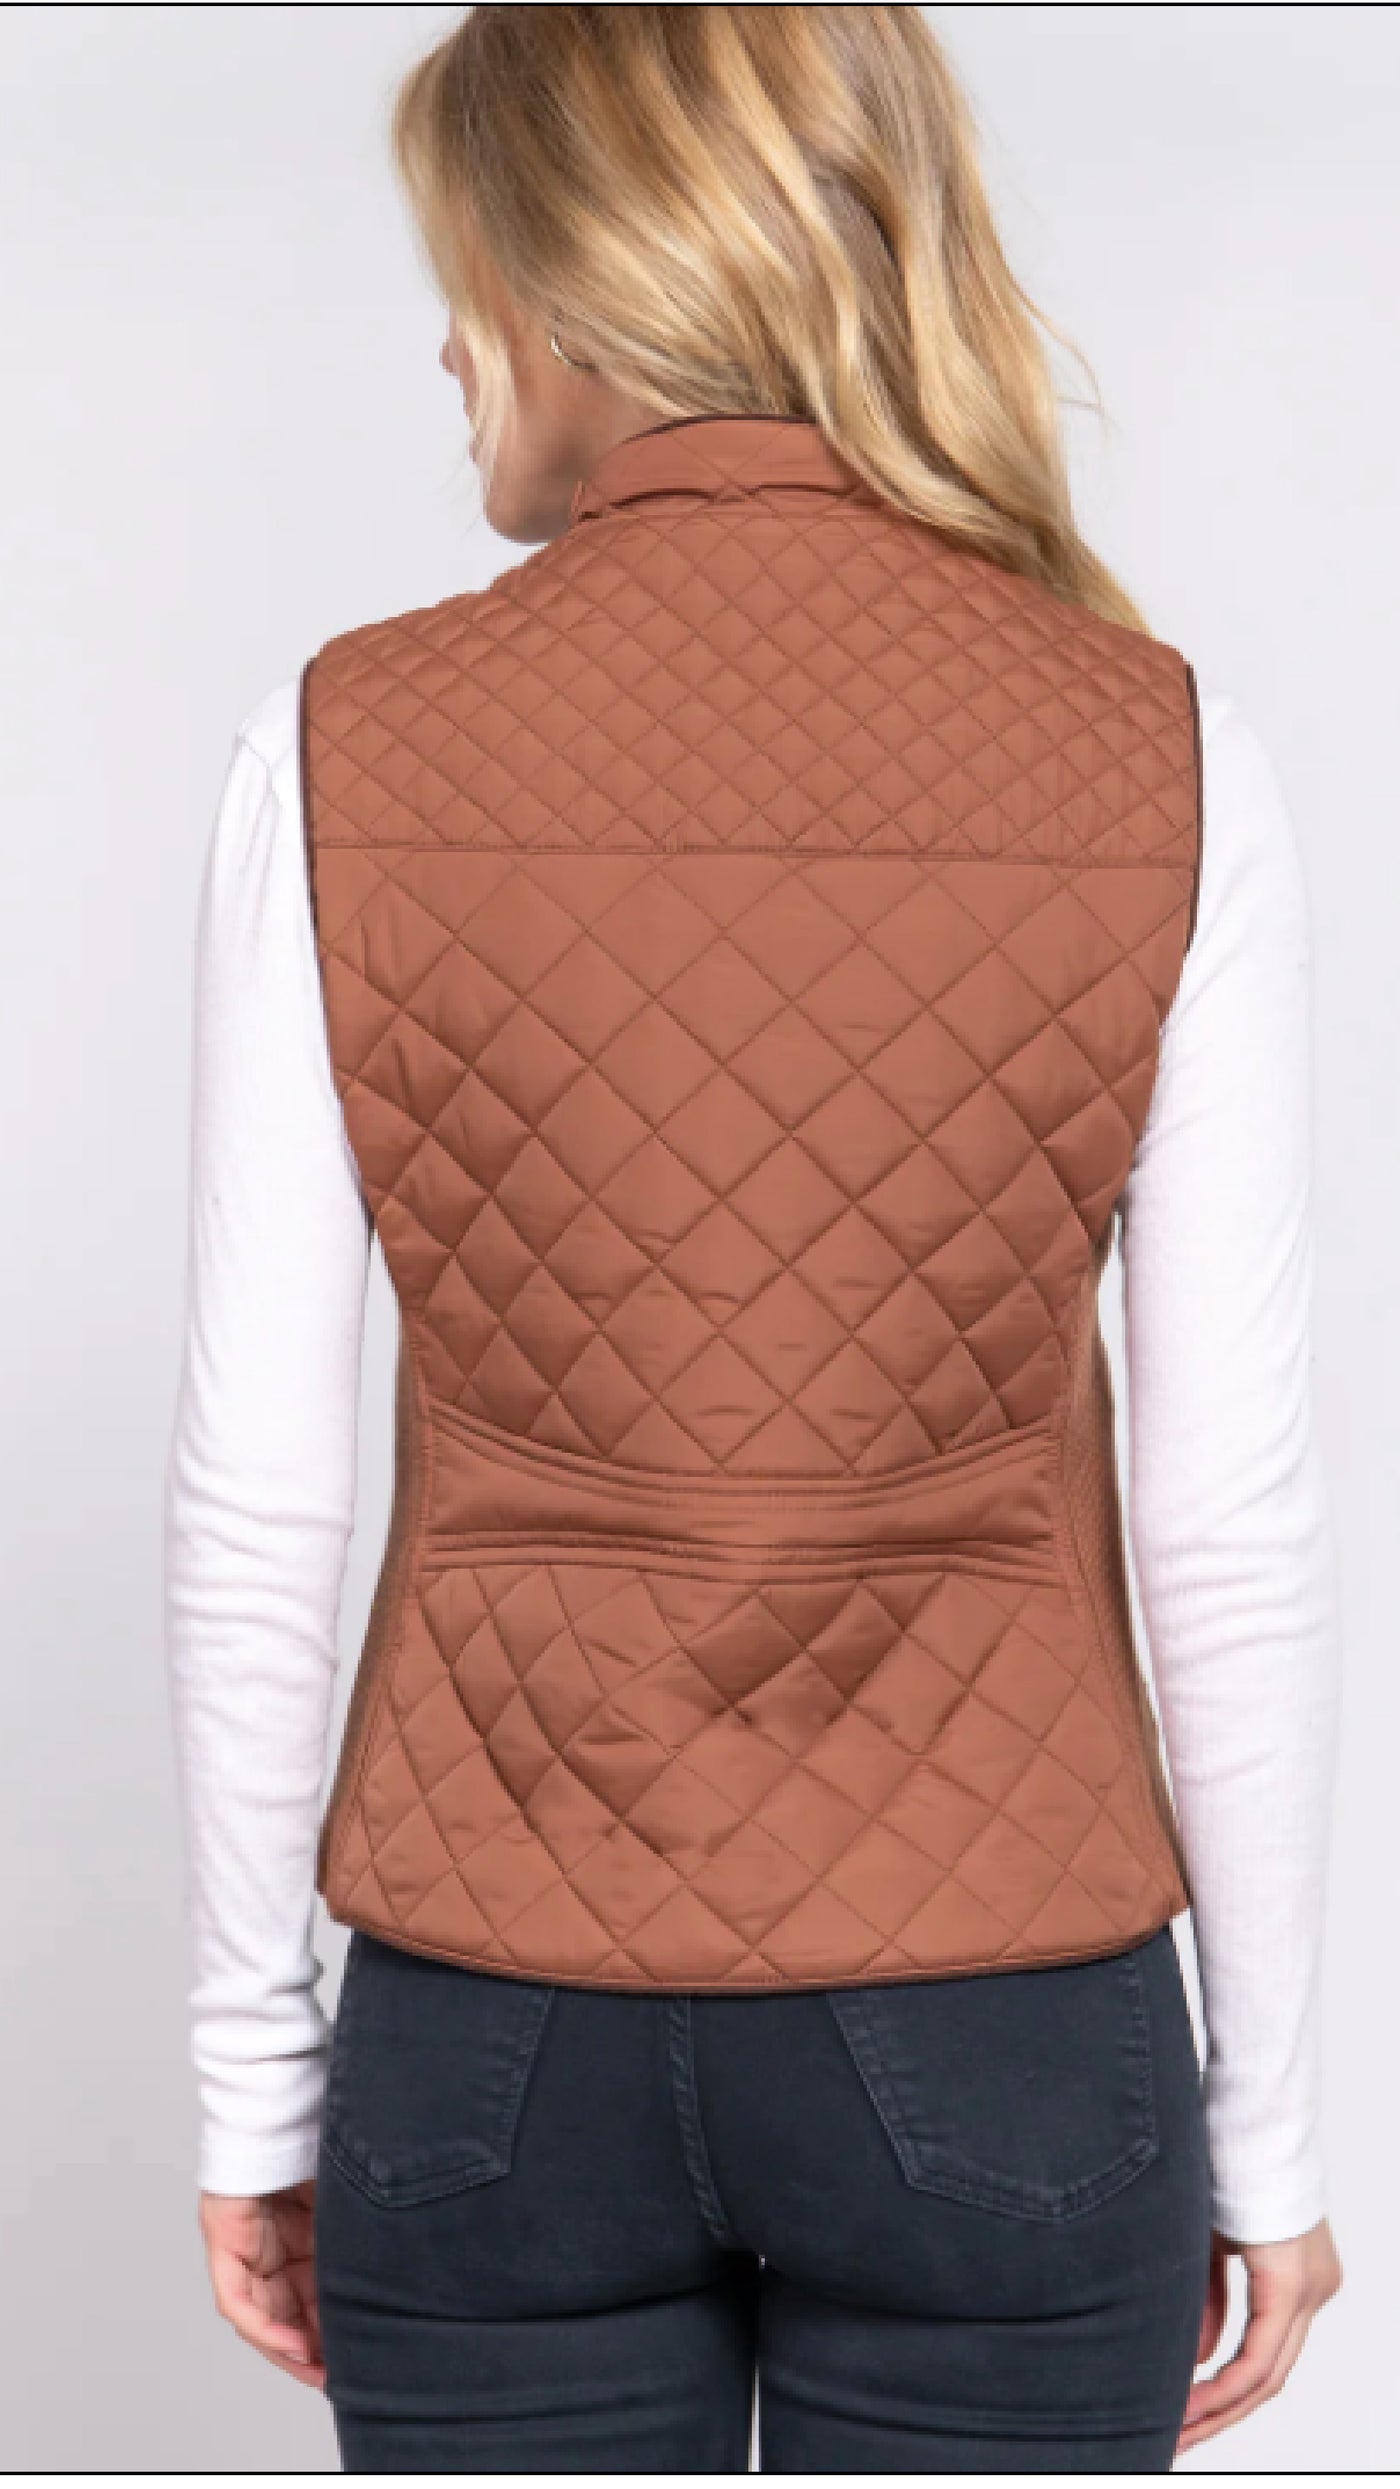 Harvest Time Vest - Camel - Piper and Hollow Boutique